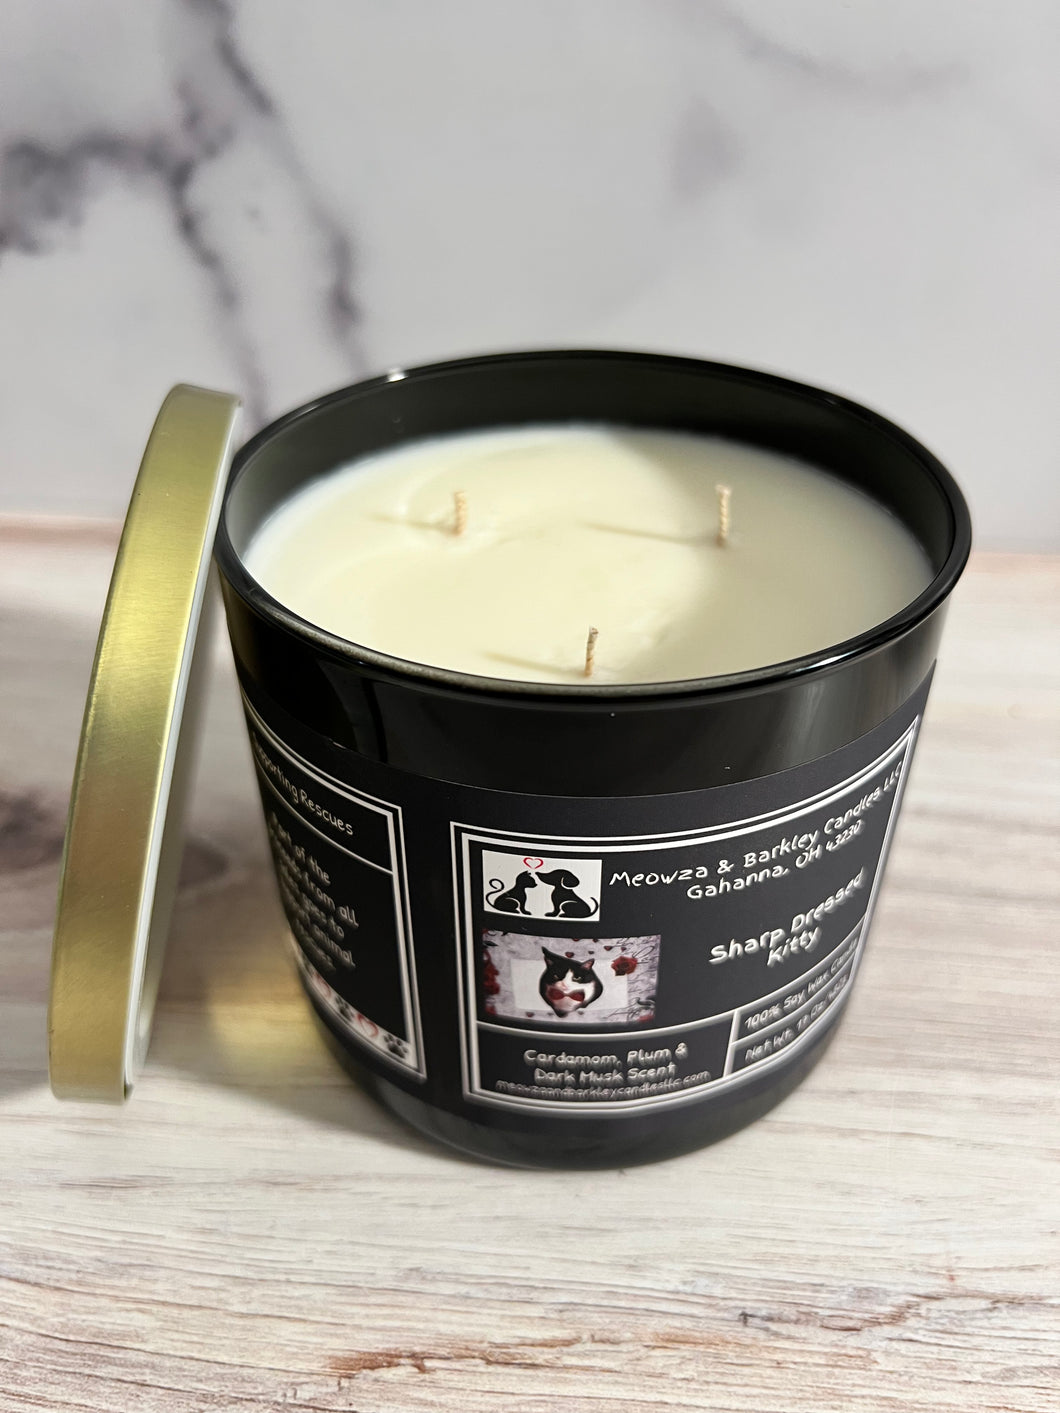 Sharp Dressed Kitty - Large Jar 17 Ounce 3 Wick Soy Candle - Cardamom, Plum & Dark Musk Scent